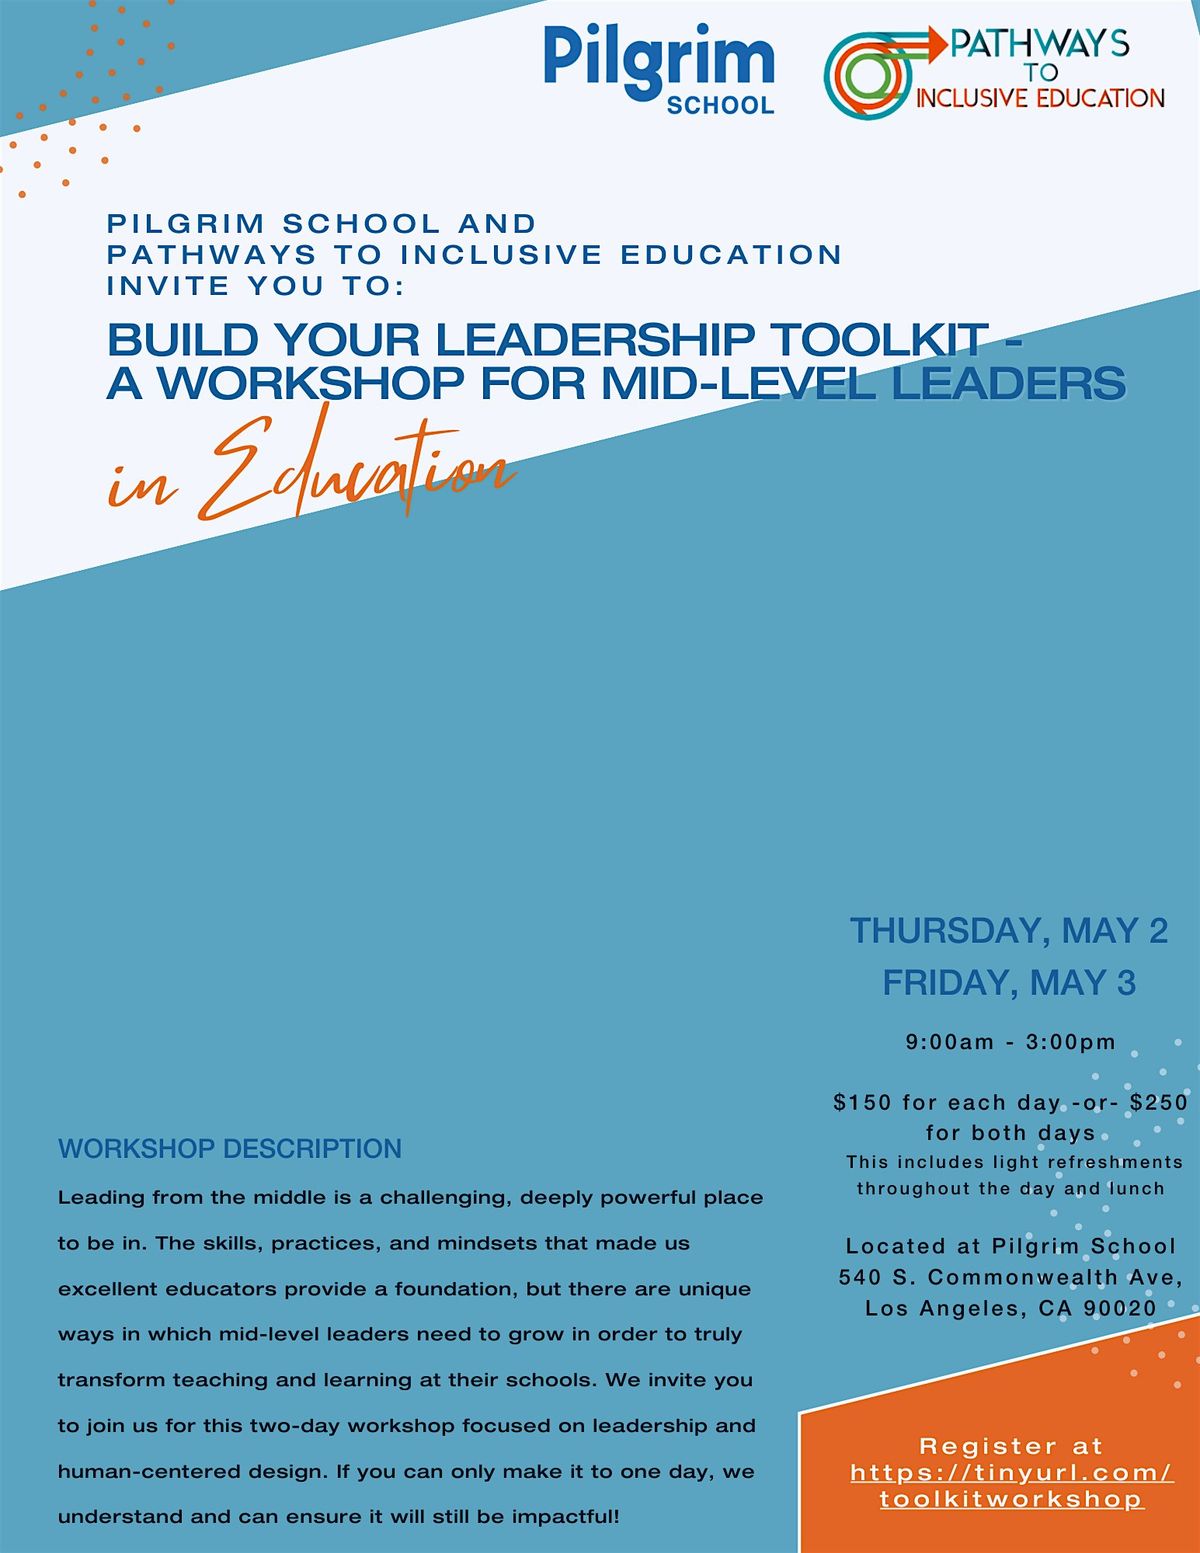 Build Your Leadership Toolkit - A Workshop for Mid-Level Leaders